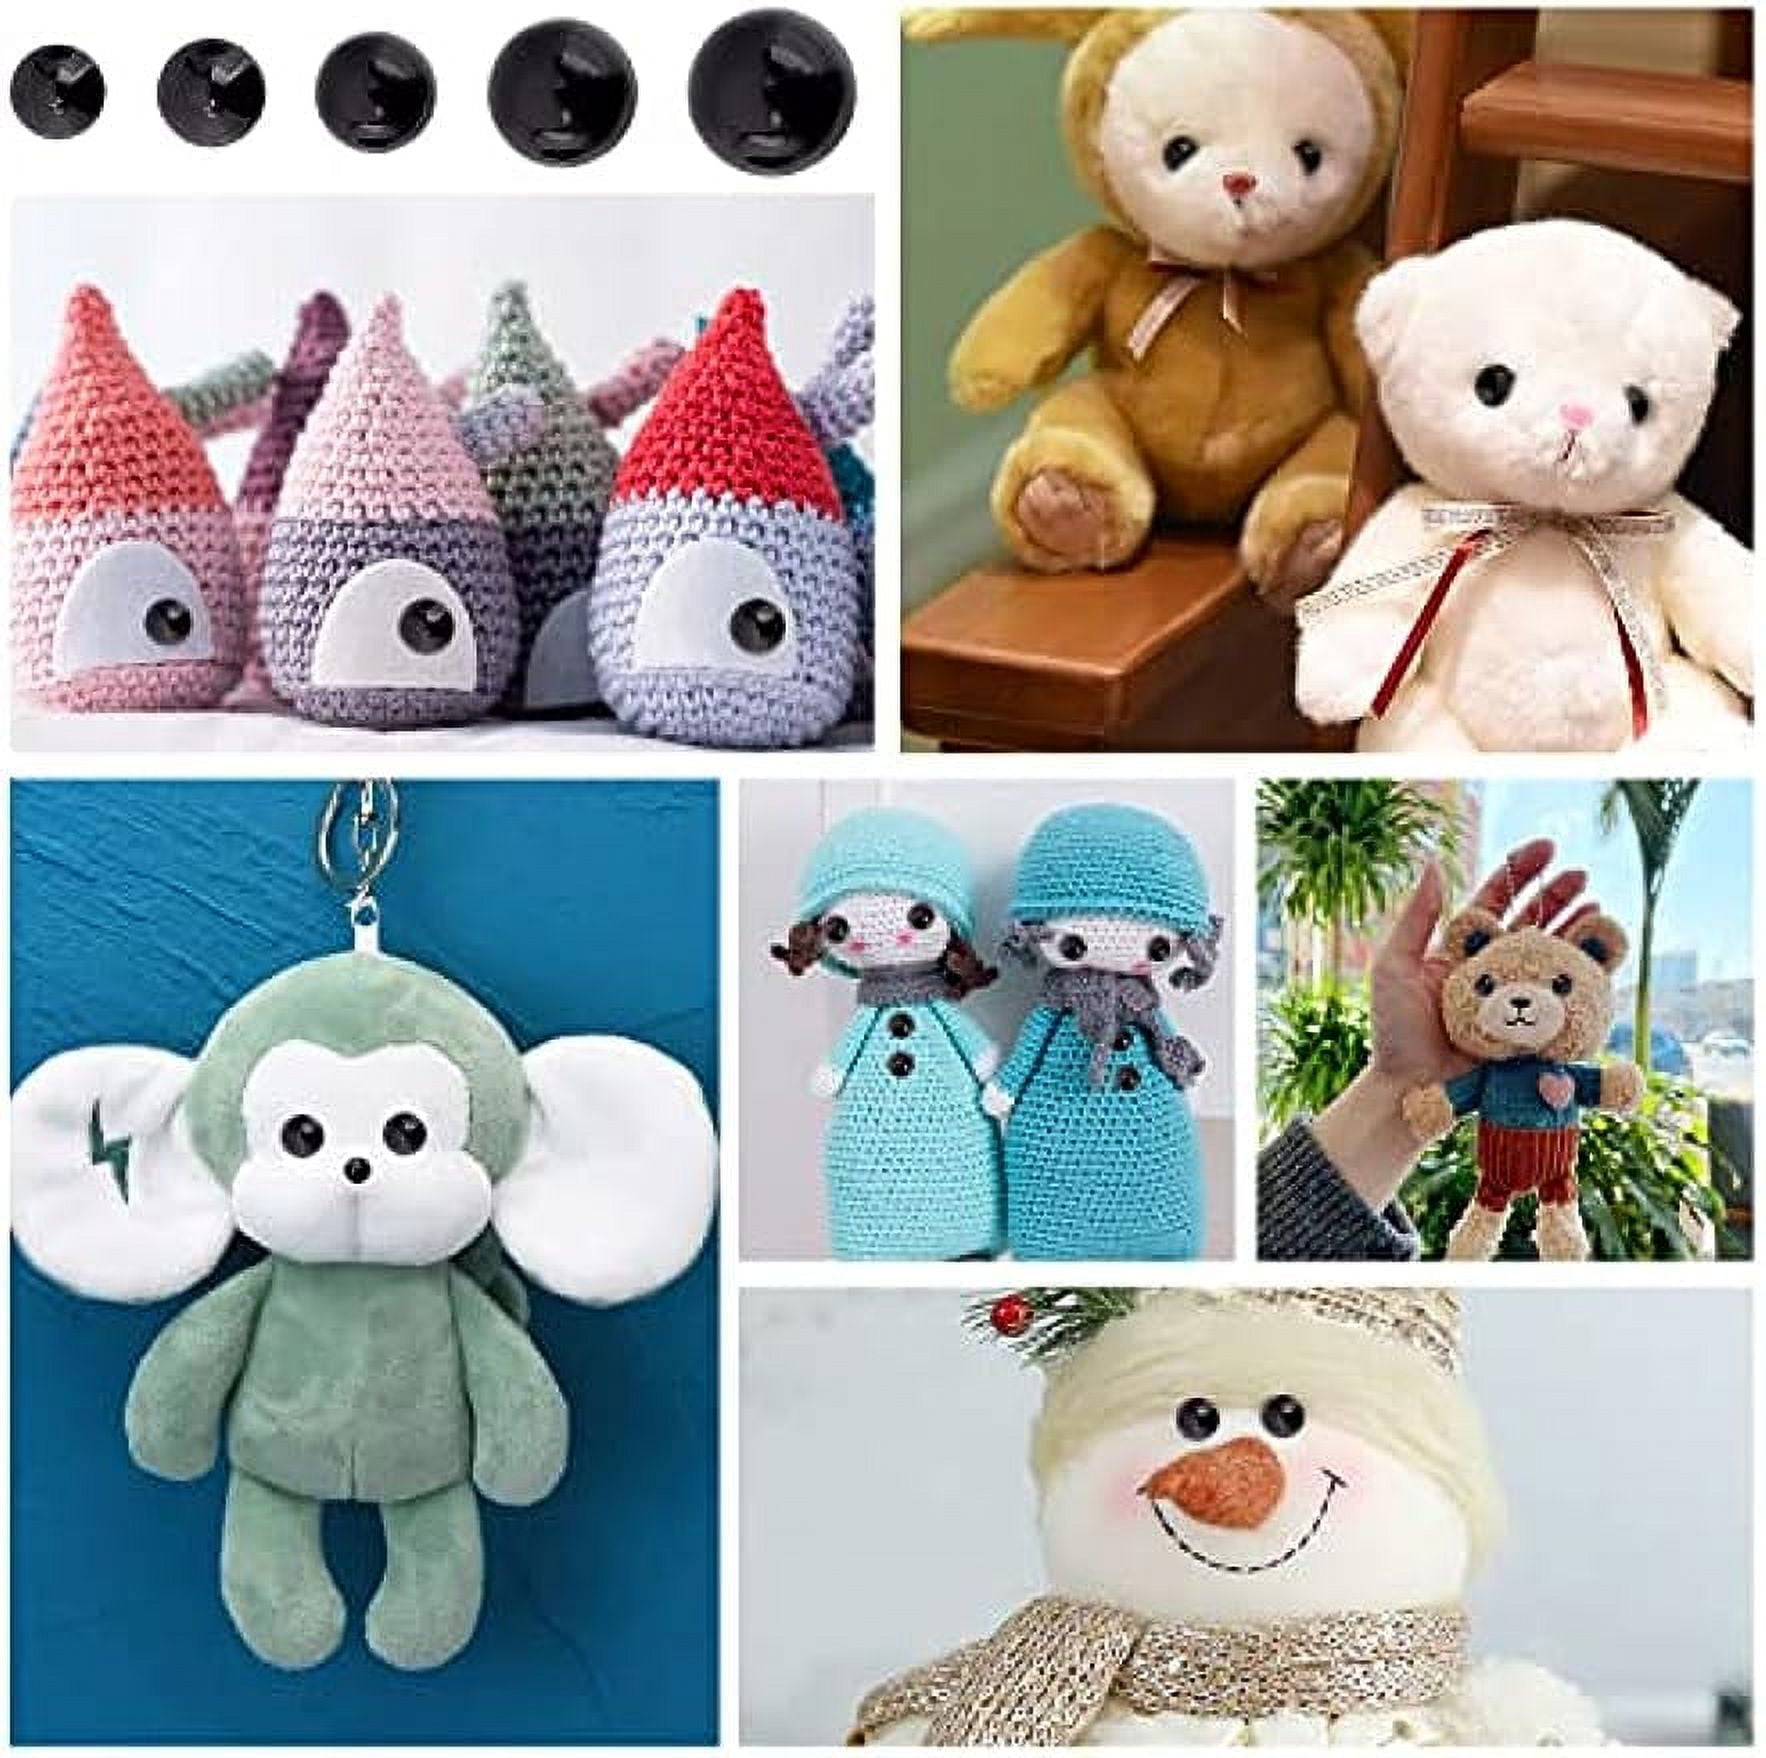 56 Pieces 16-30 mm Large Safety Eyes for Amigurumi Stuffed Animal Eyes Plastic Craft Crochet Eyes for DIY of Puppet, Bear, Toy Doll Making Supplies, 6